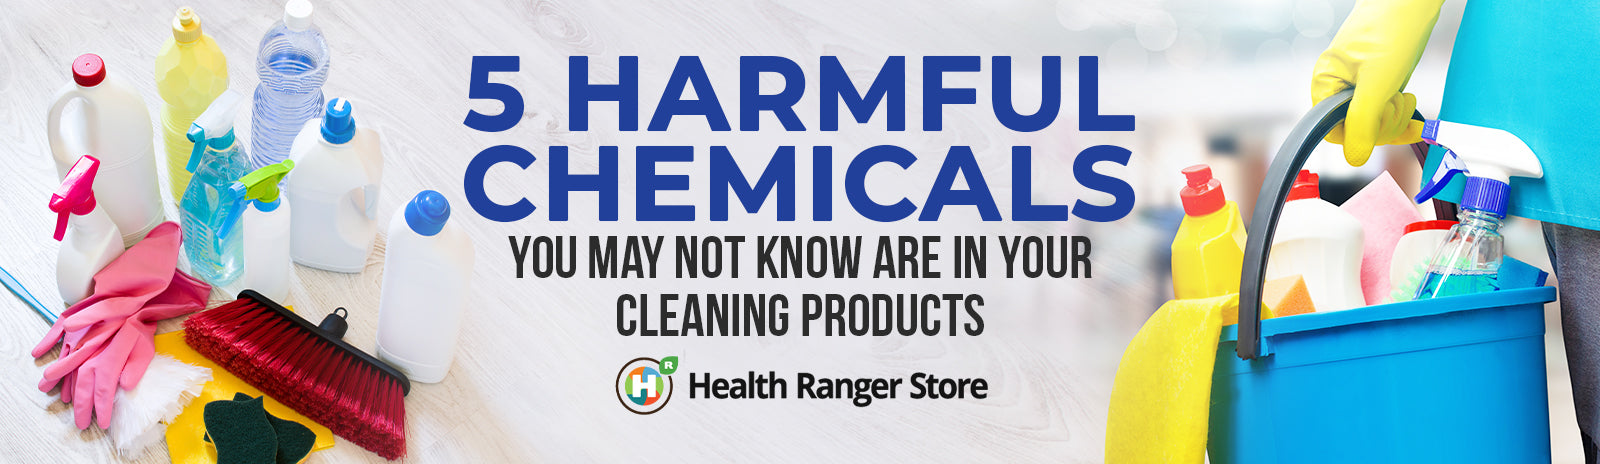 5 harmful chemicals you may not know are in your cleaning products